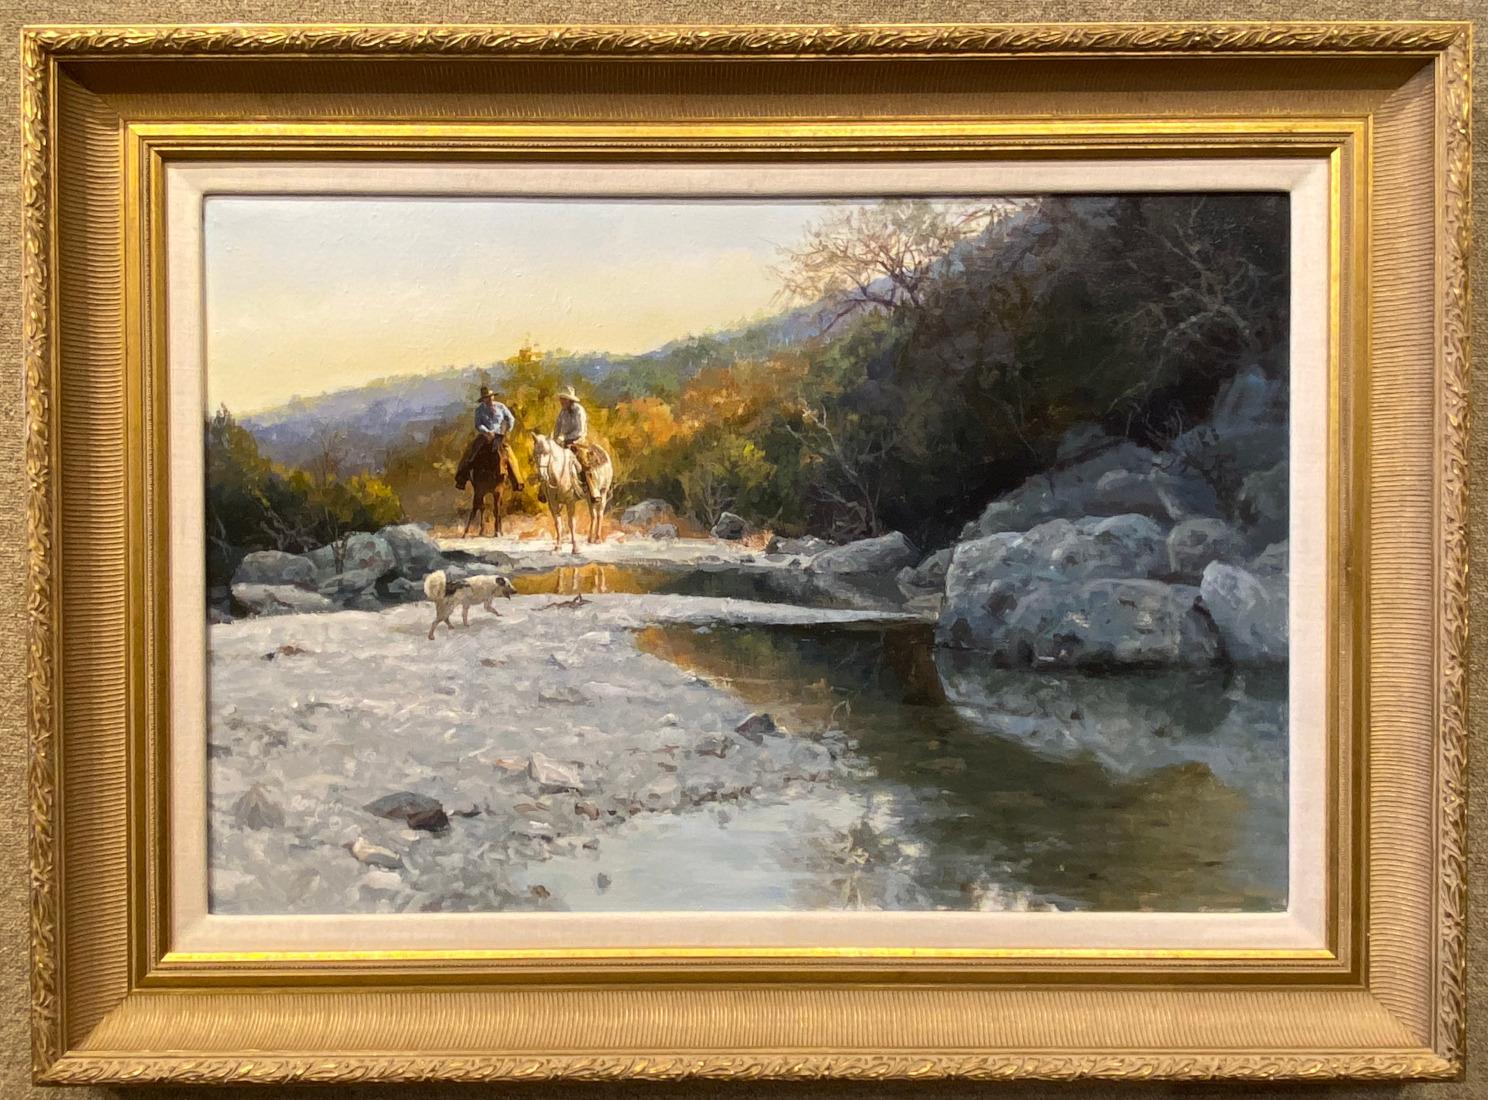 James Robinson Landscape Painting - "LOST MAPLES" JAMES ROBINSON, TEXAS LANDSCAPE WESTERN COWBOYS